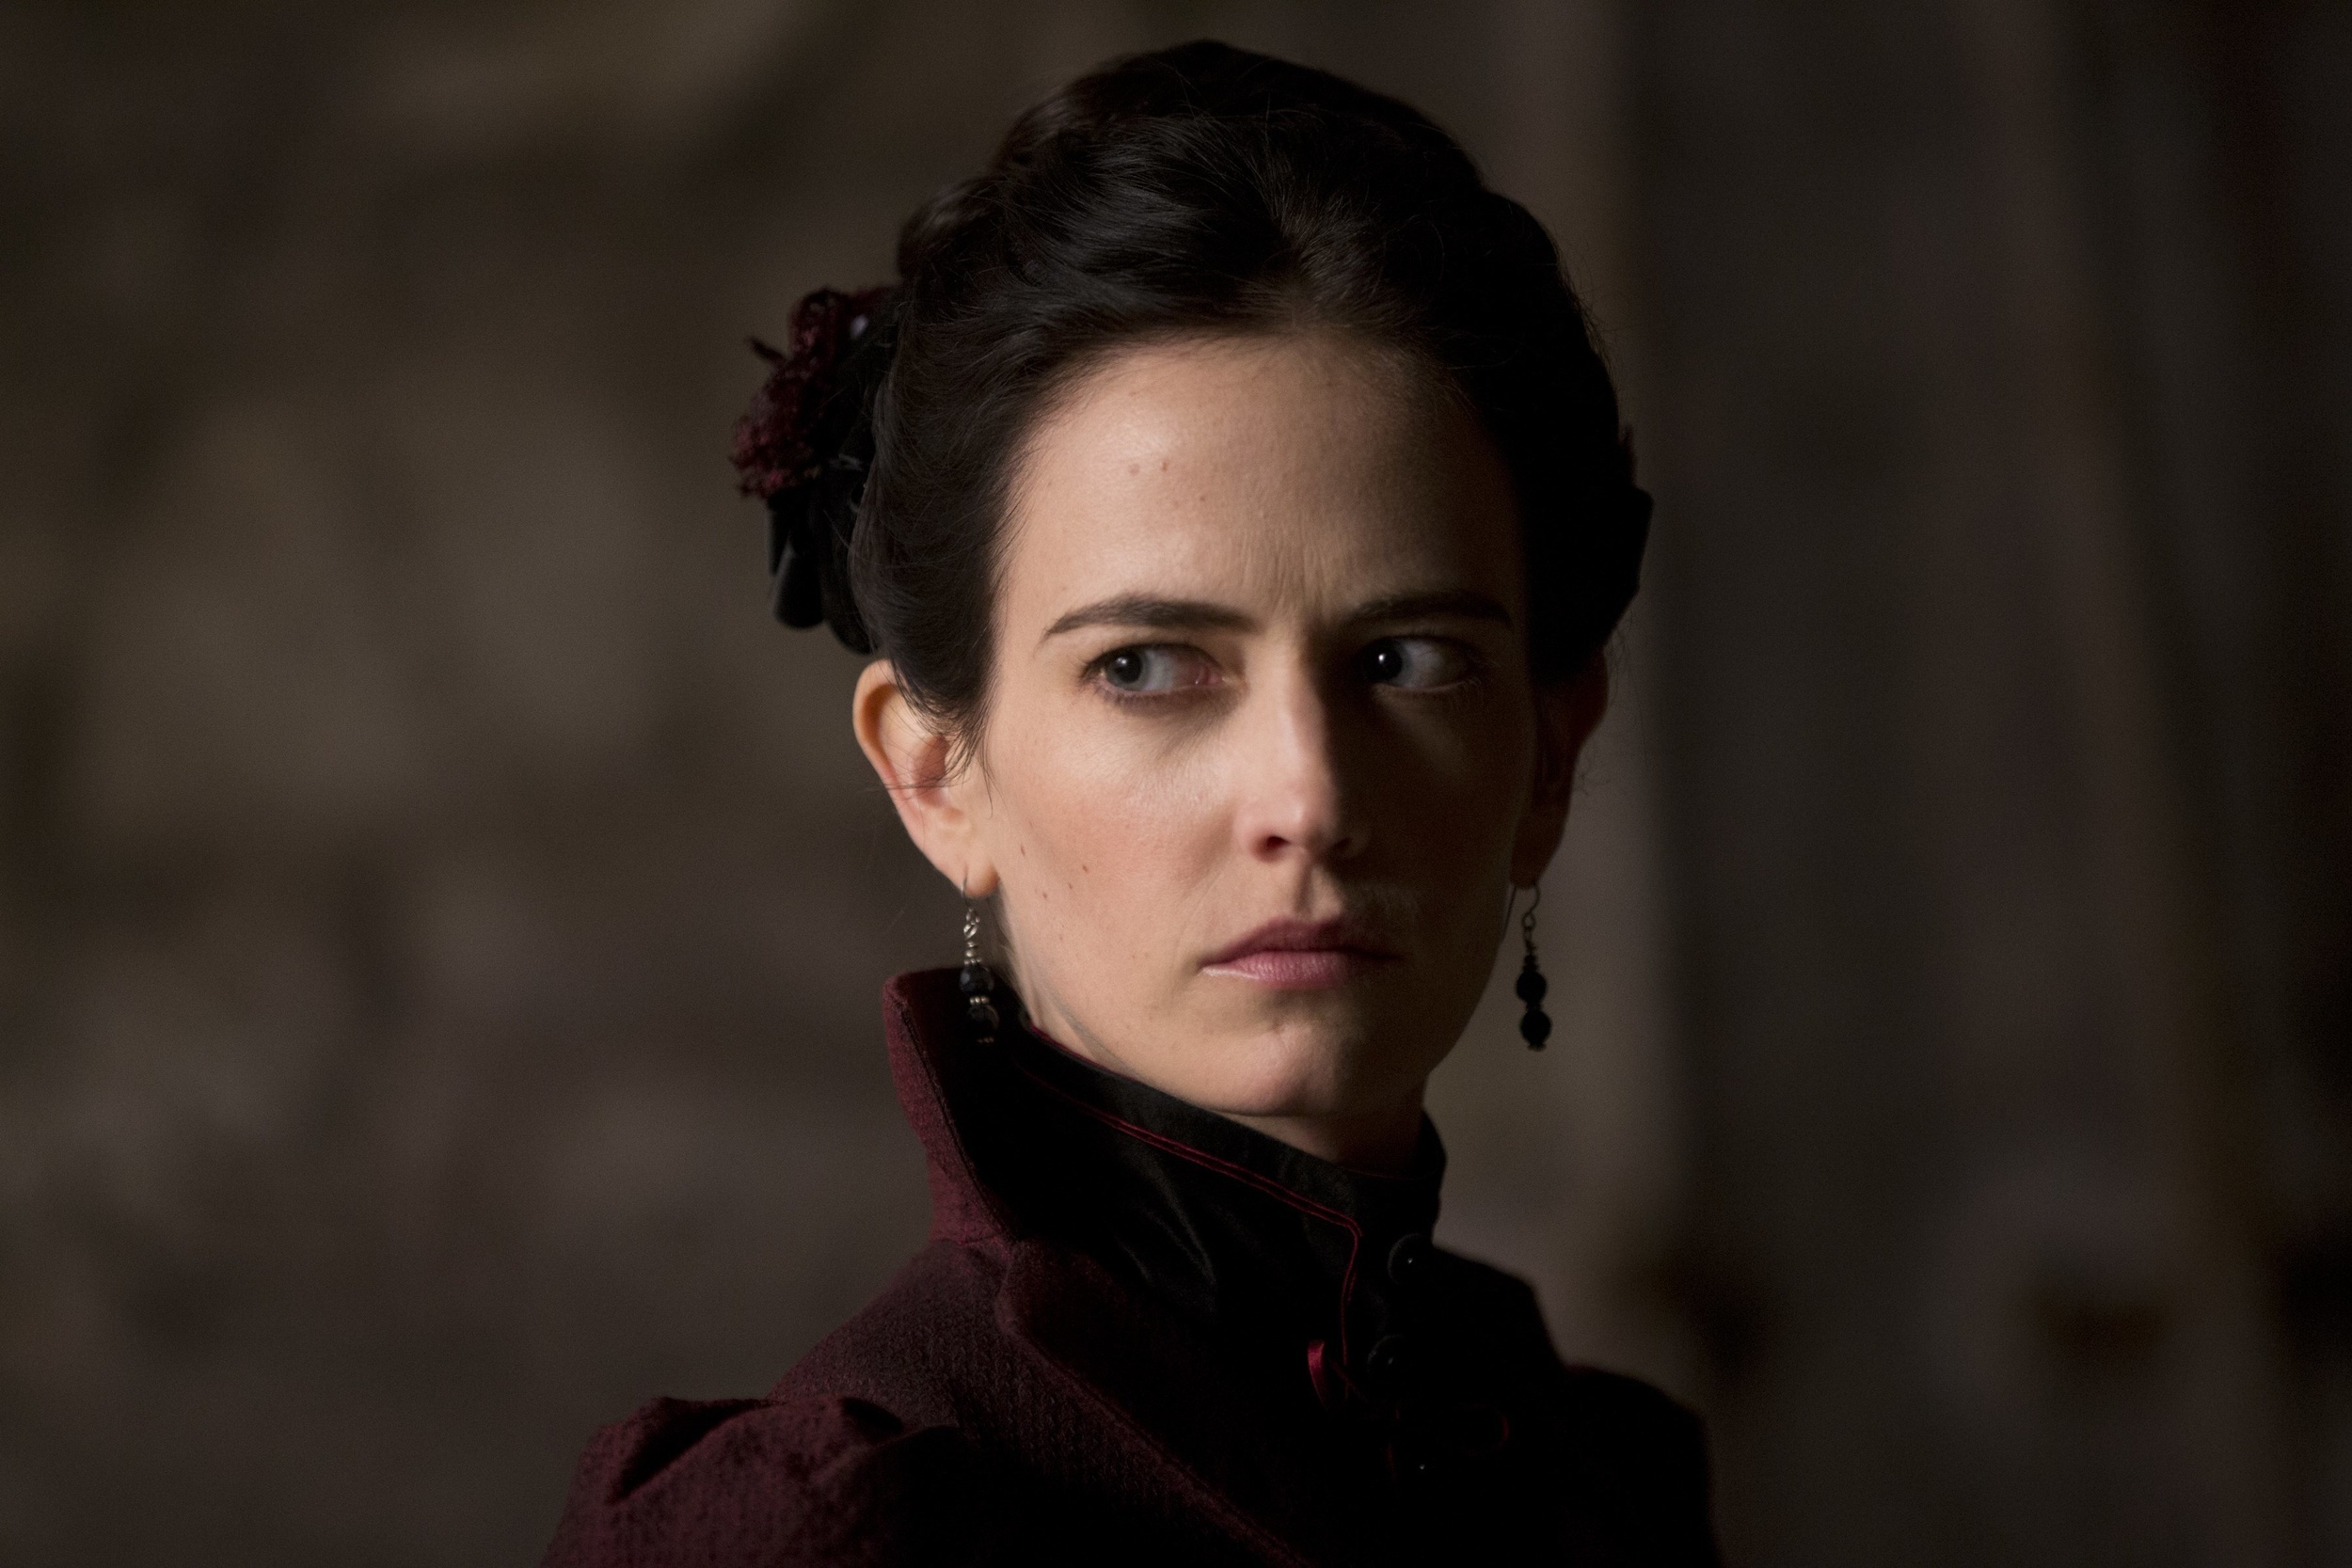 <p><em>Penny Dreadful</em> <span>is one of the most intriguing and creative series on Showtime. Set in the 19th century, it features, among other things, magic, monsters, and mysticism, as well as some of the most famous figures from Western horror literature, including none other than Victor Frankenstein. There is beauty and bloodshed in the series, which features some fantastic performances from a remarkable cast, including Eva Green, Timothy Dalton, and Rory Kinnear. It’s the type of dark fantasy series that combines the best that horror and dark fantasy has to offer. </span></p><p><a href='https://www.msn.com/en-us/community/channel/vid-cj9pqbr0vn9in2b6ddcd8sfgpfq6x6utp44fssrv6mc2gtybw0us'>Follow us on MSN to see more of our exclusive entertainment content.</a></p>